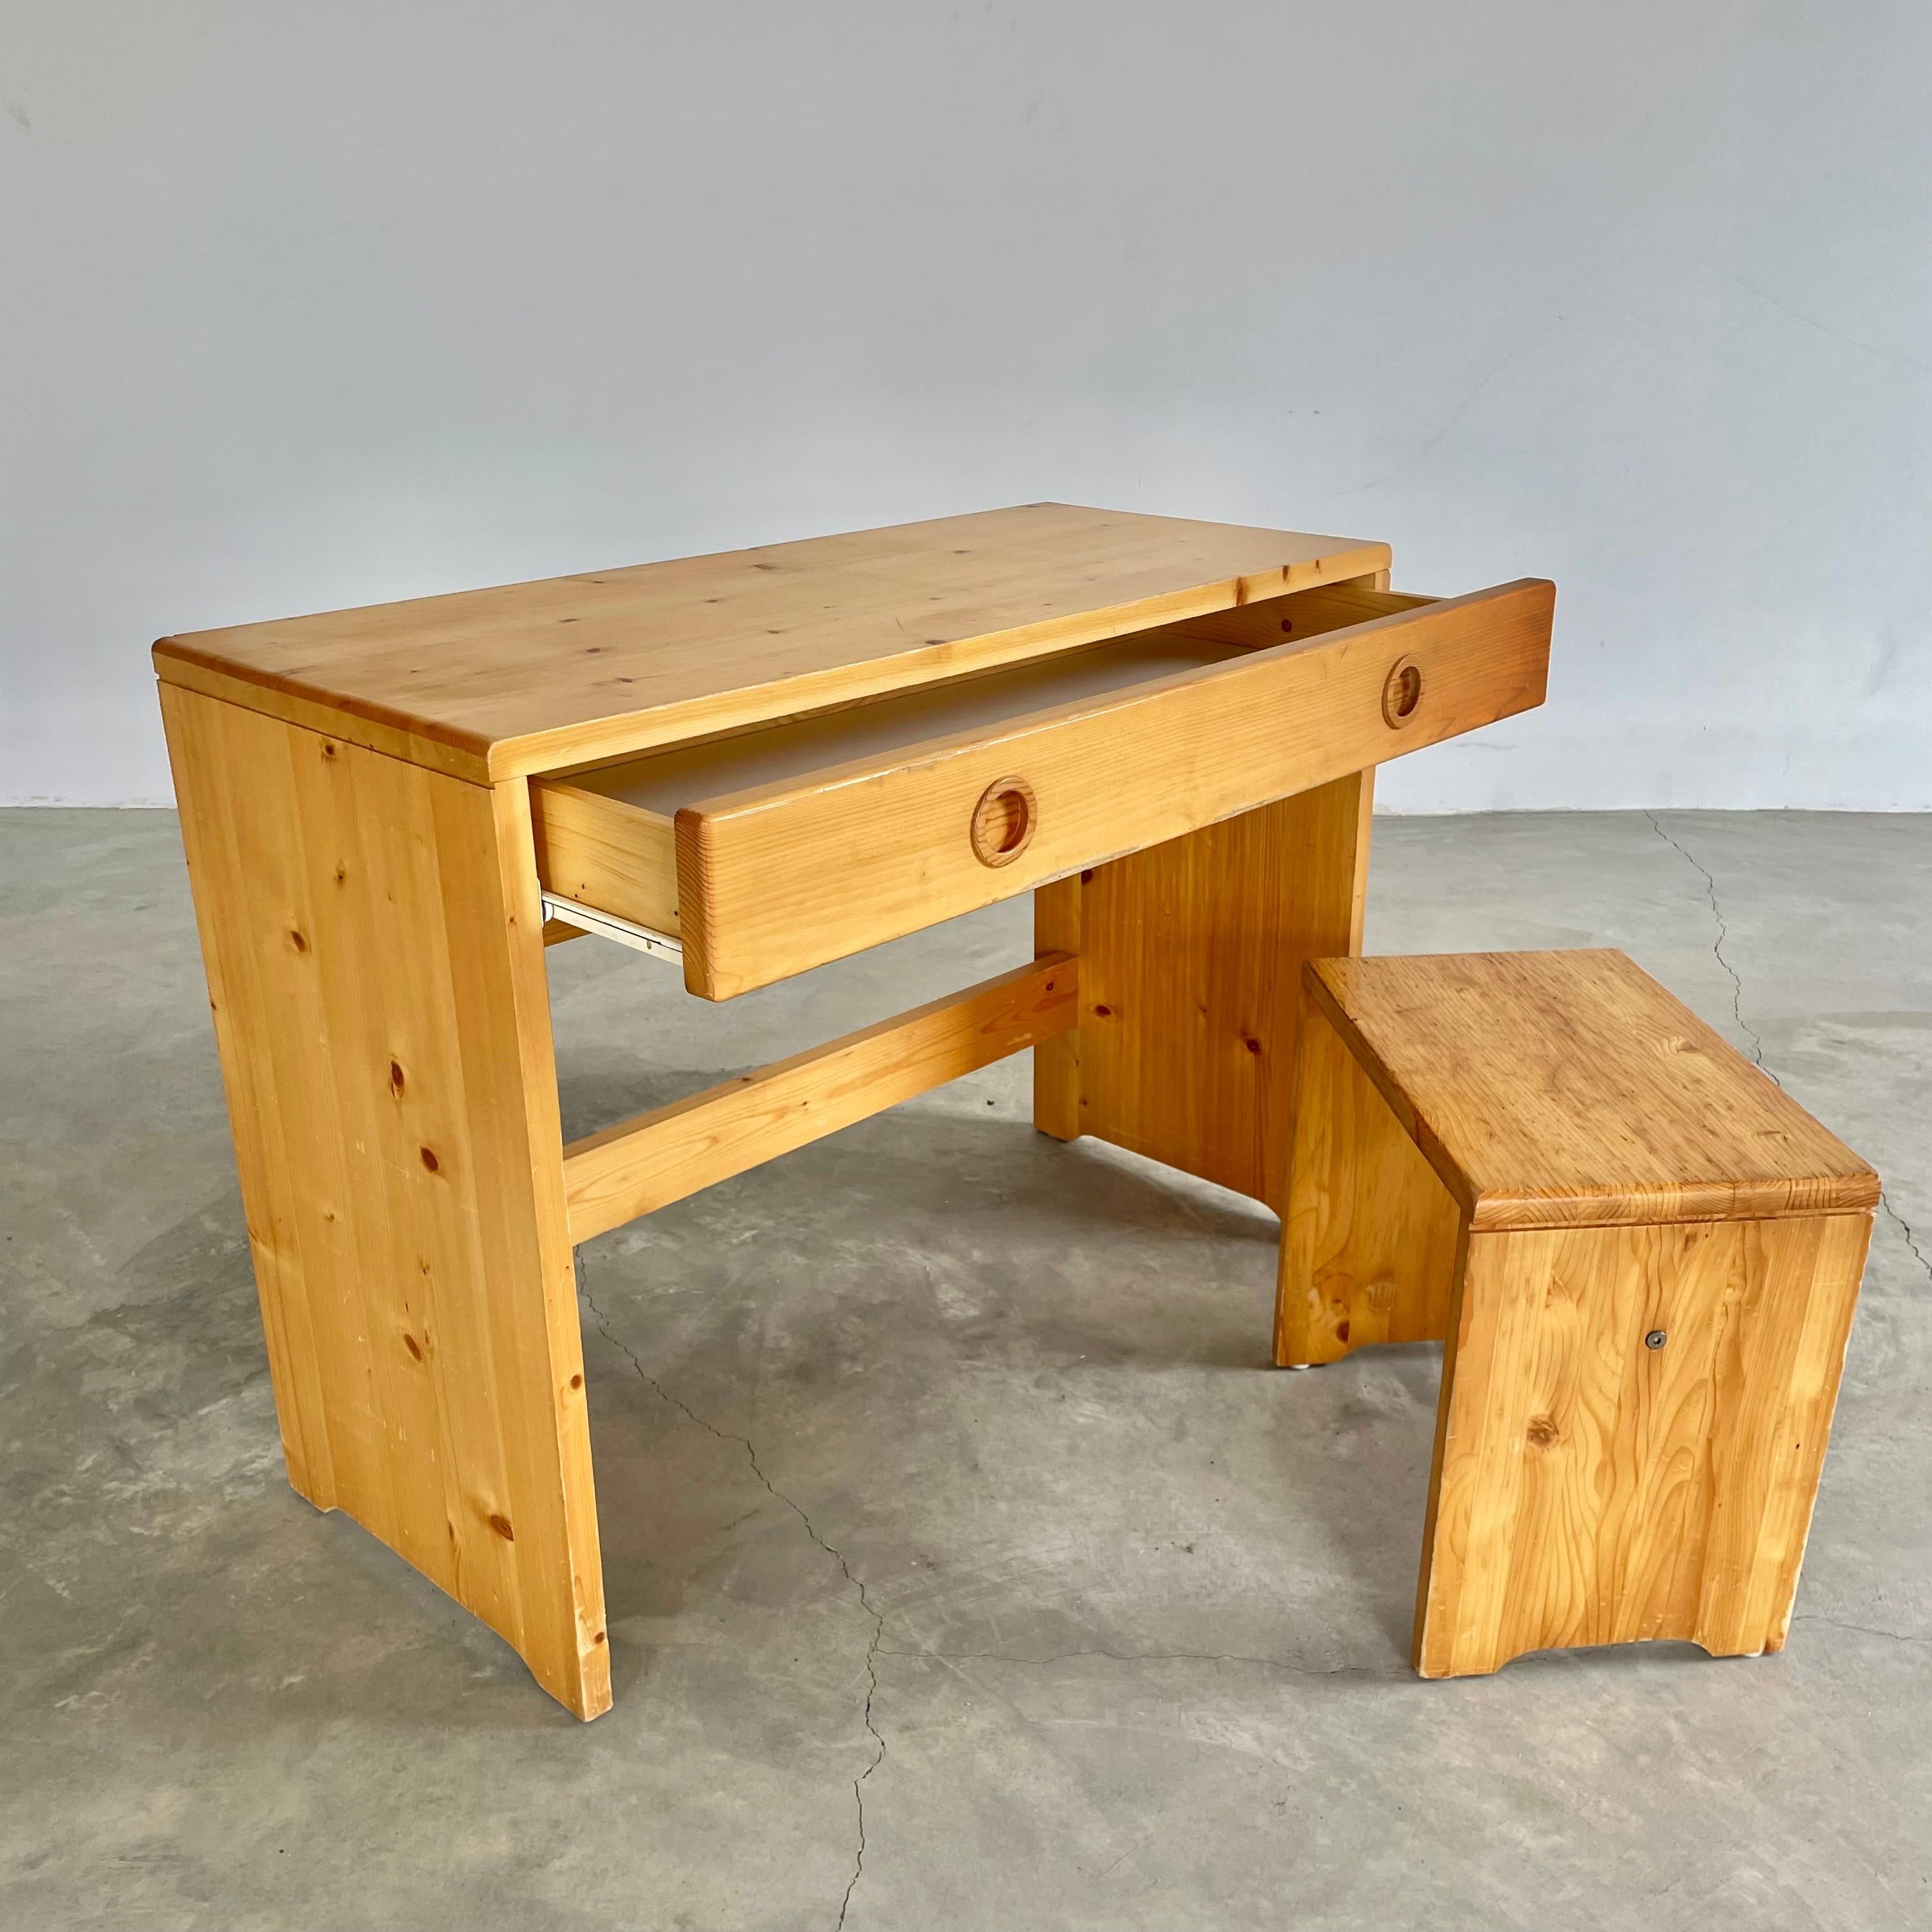 Charlotte Perriand Pine Desk for Les Arcs with Matching Stool, 1960s France For Sale 2